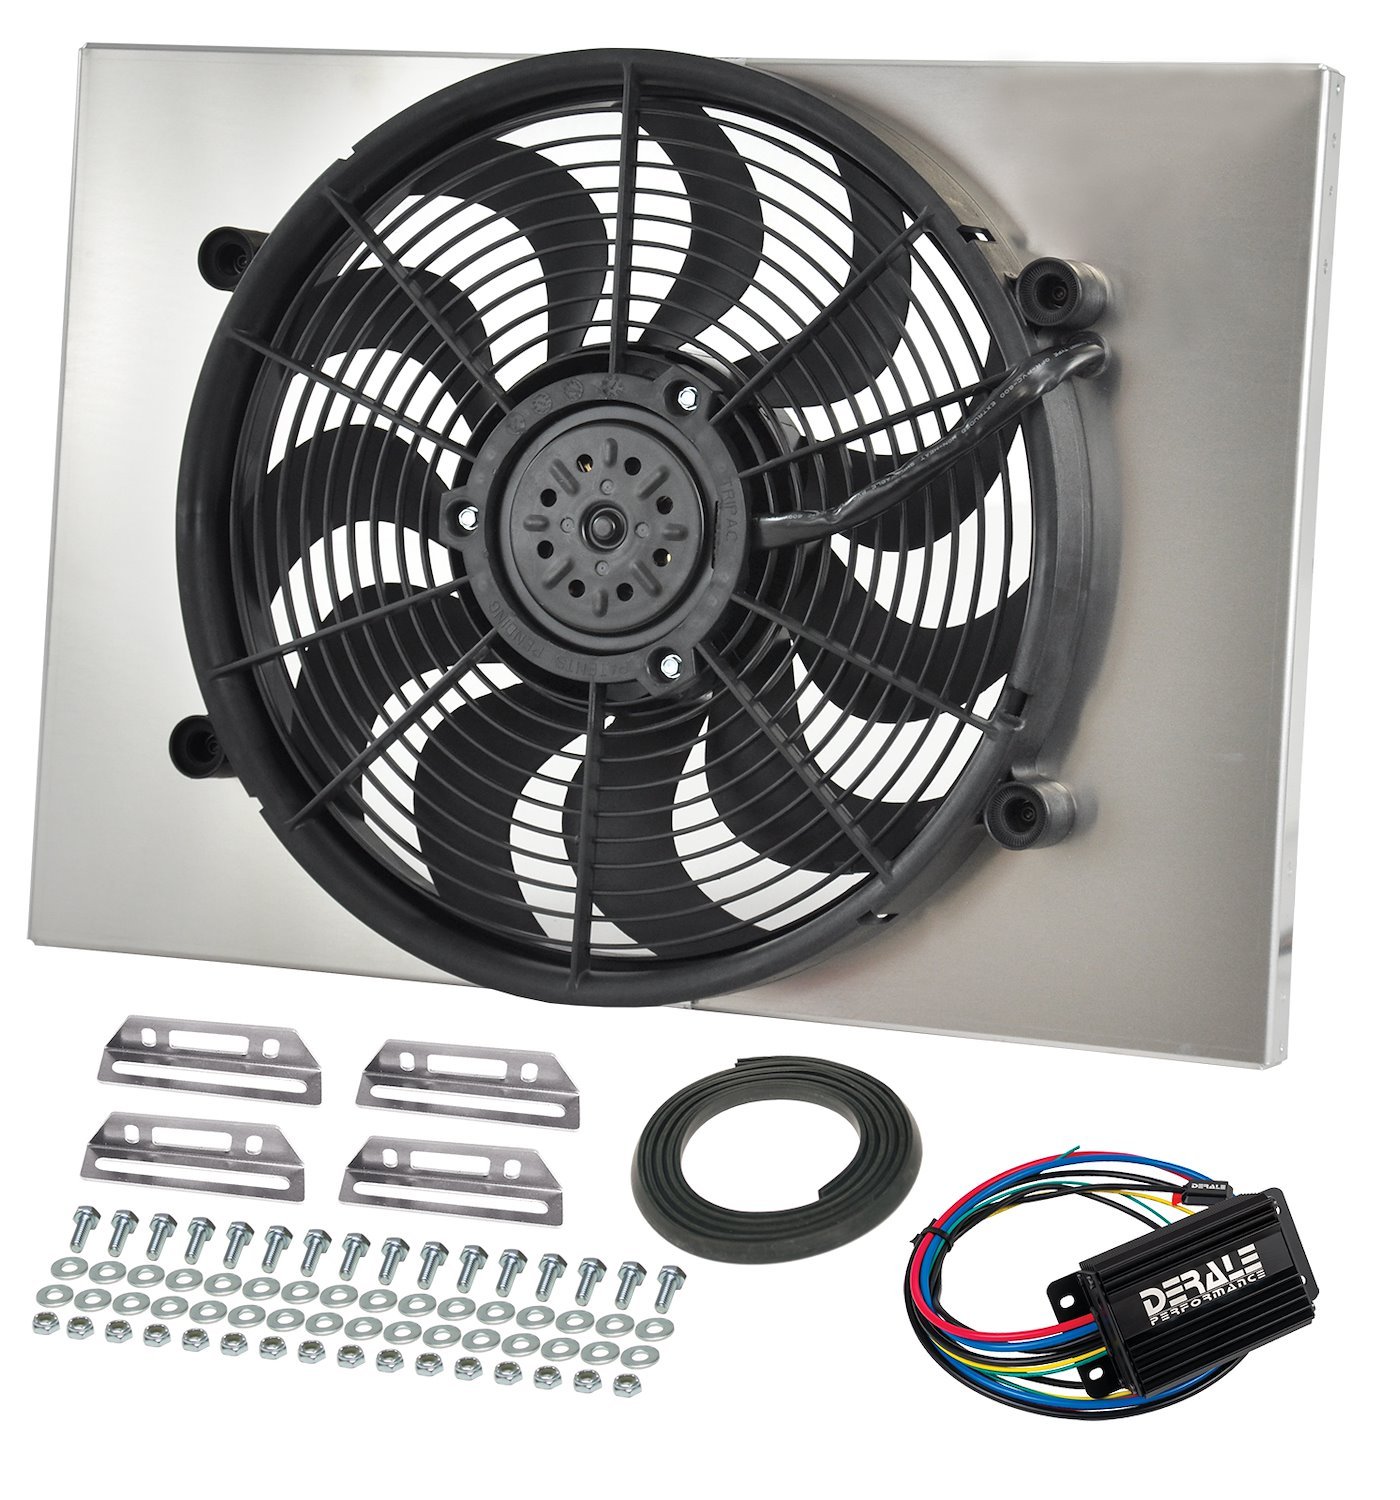 Multi-Speed Puller Fan With PWM Controller In Aluminum